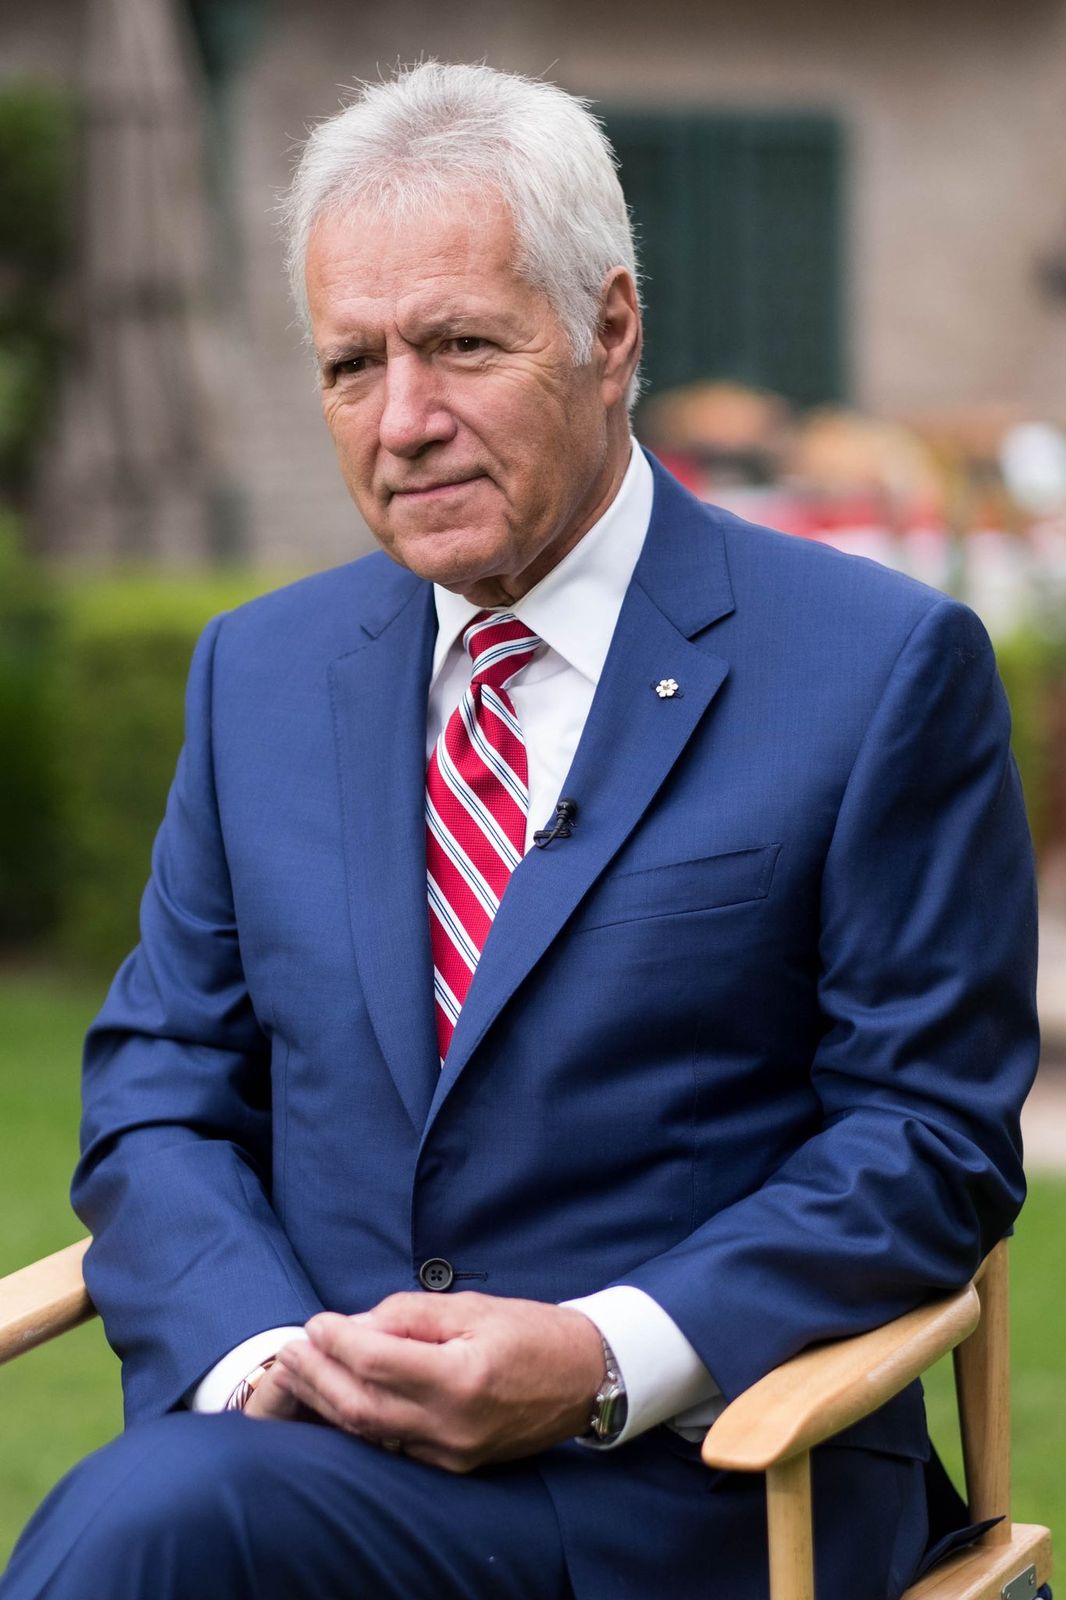 TV personality Alex Trebek at the 150th anniversary of Canada's Confederation at the Official Residence of Canada on June 30, 2017 in Los Angeles, California. | Photo: Getty Images